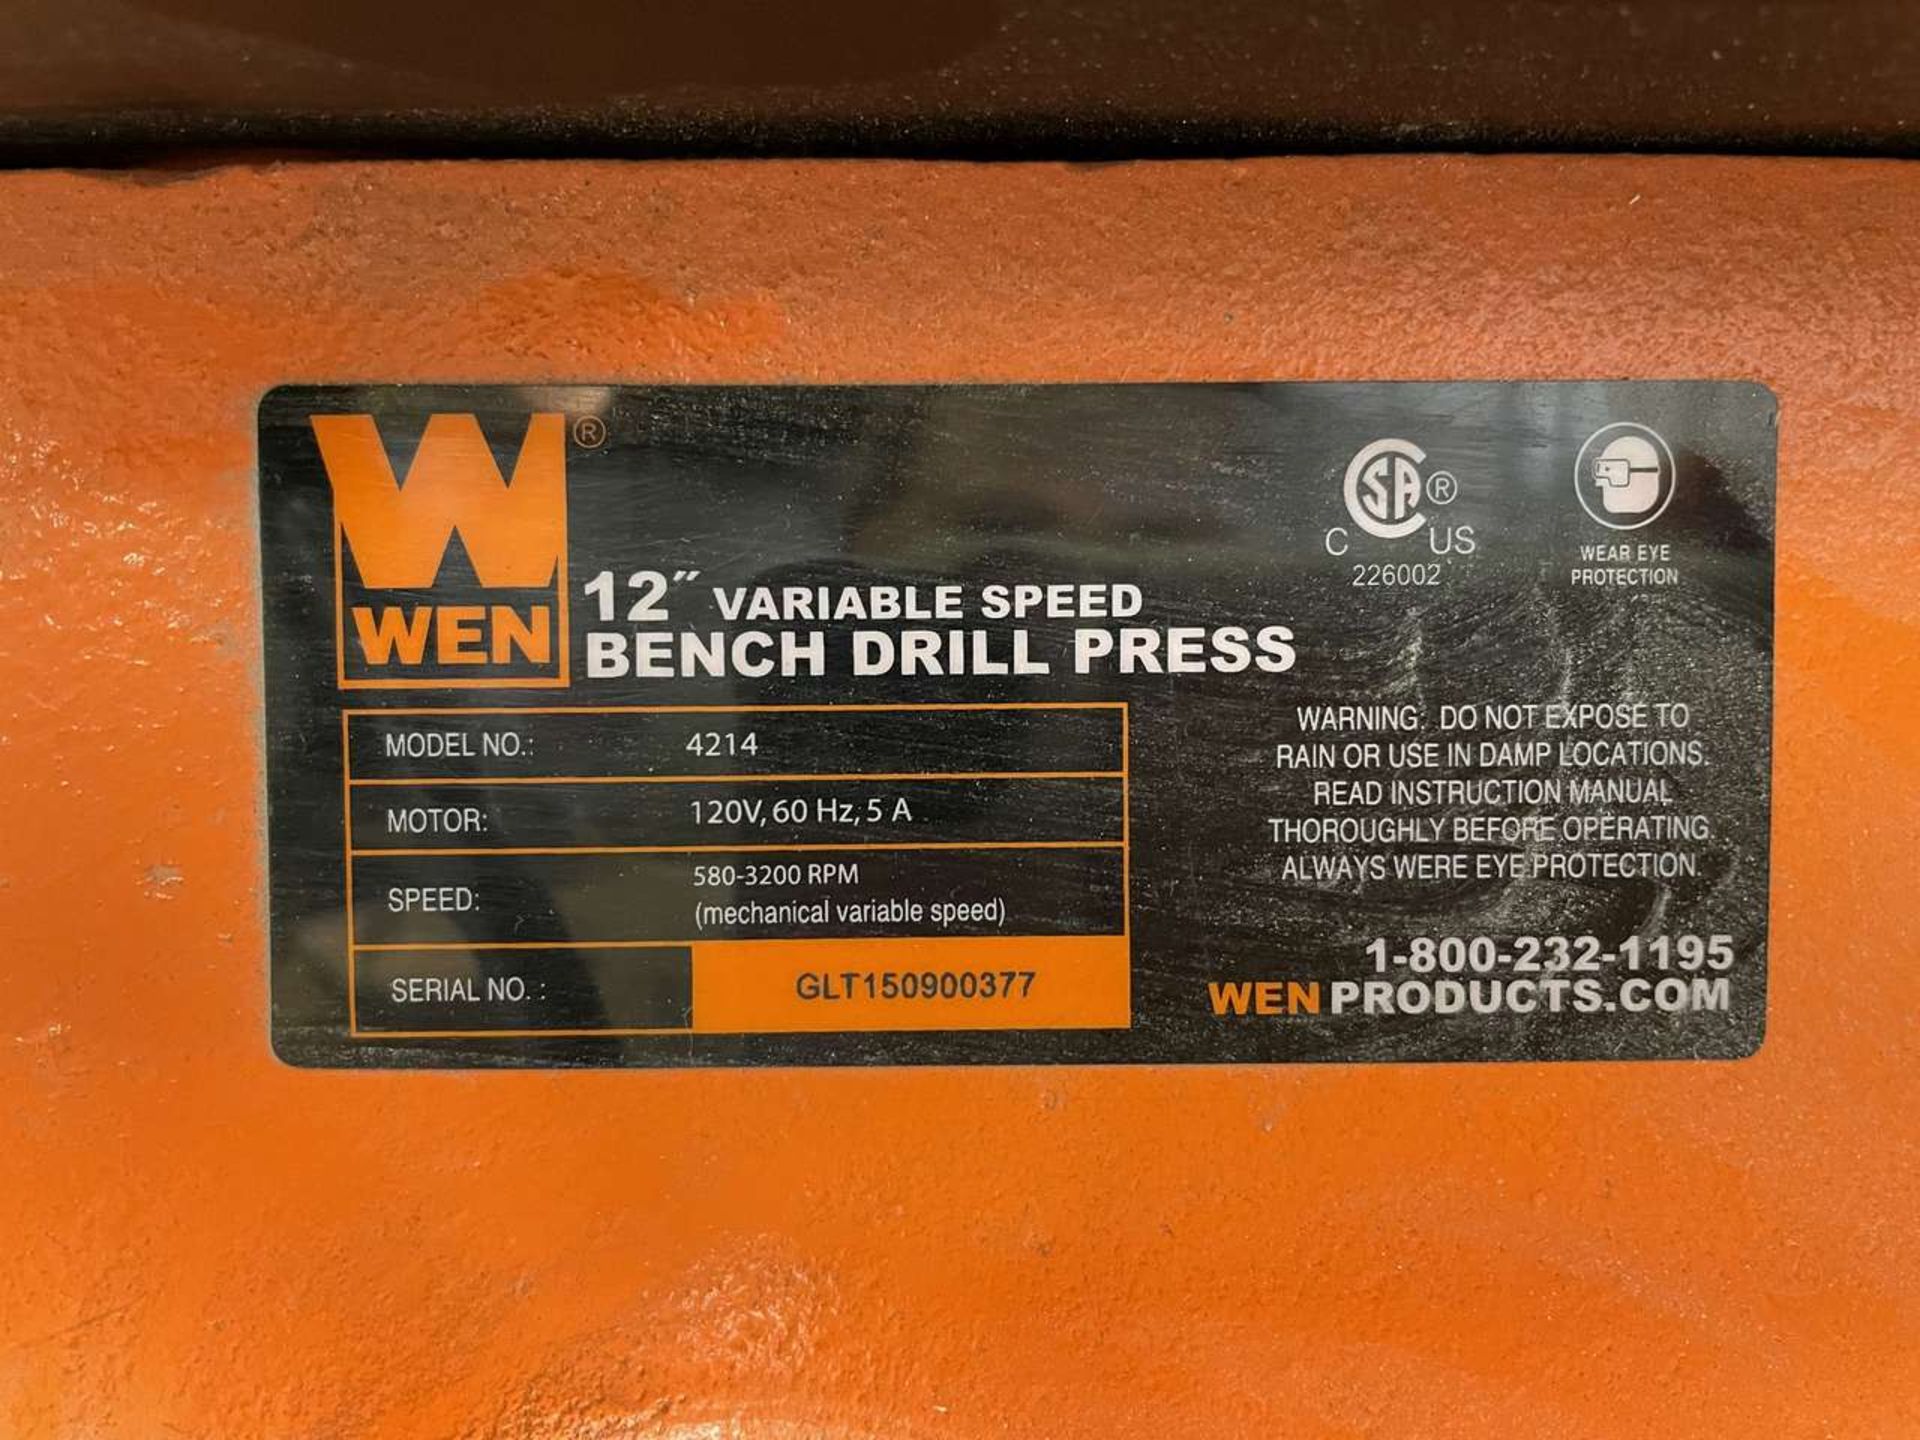 WEN 12" Variable Speed Bench Drill Press - Image 3 of 3